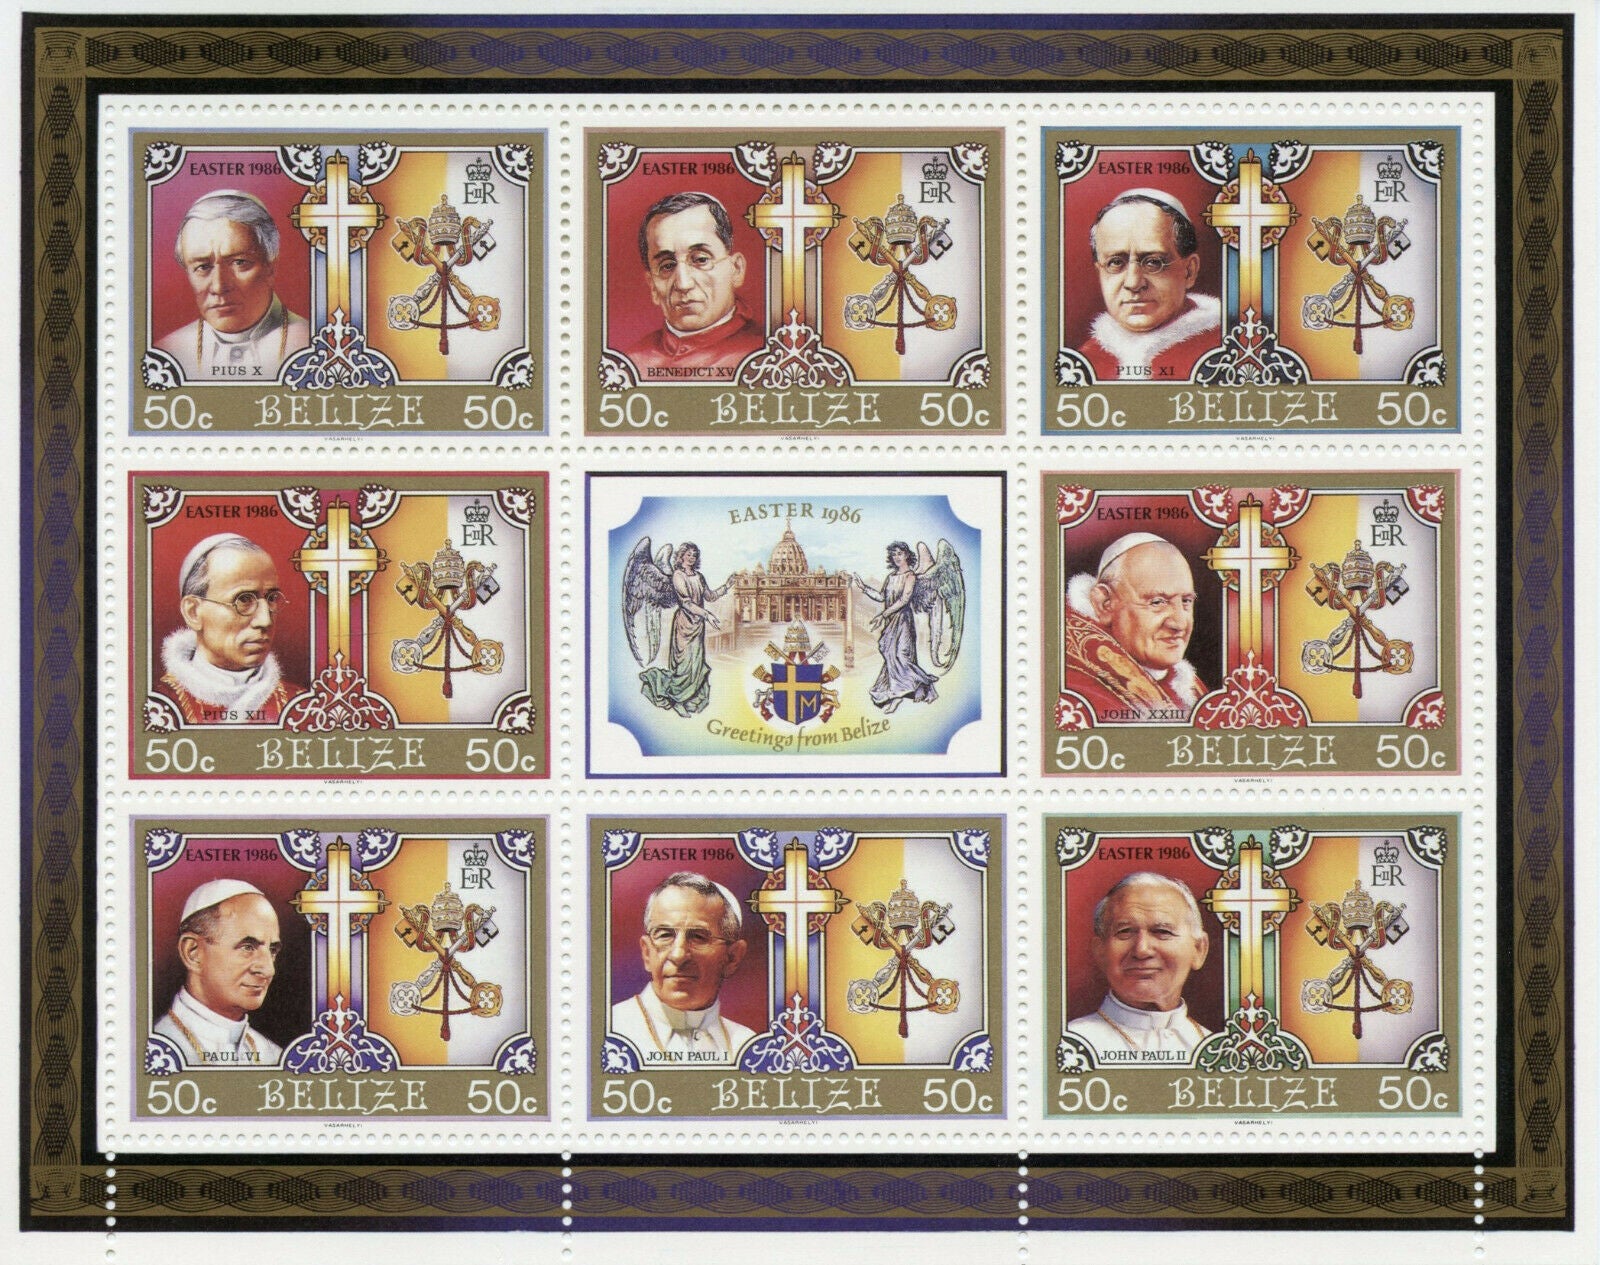 Belize 1986 MNH Easter Stamps Pope John Paul II Pius X Benedict XV Religion 8v M/S